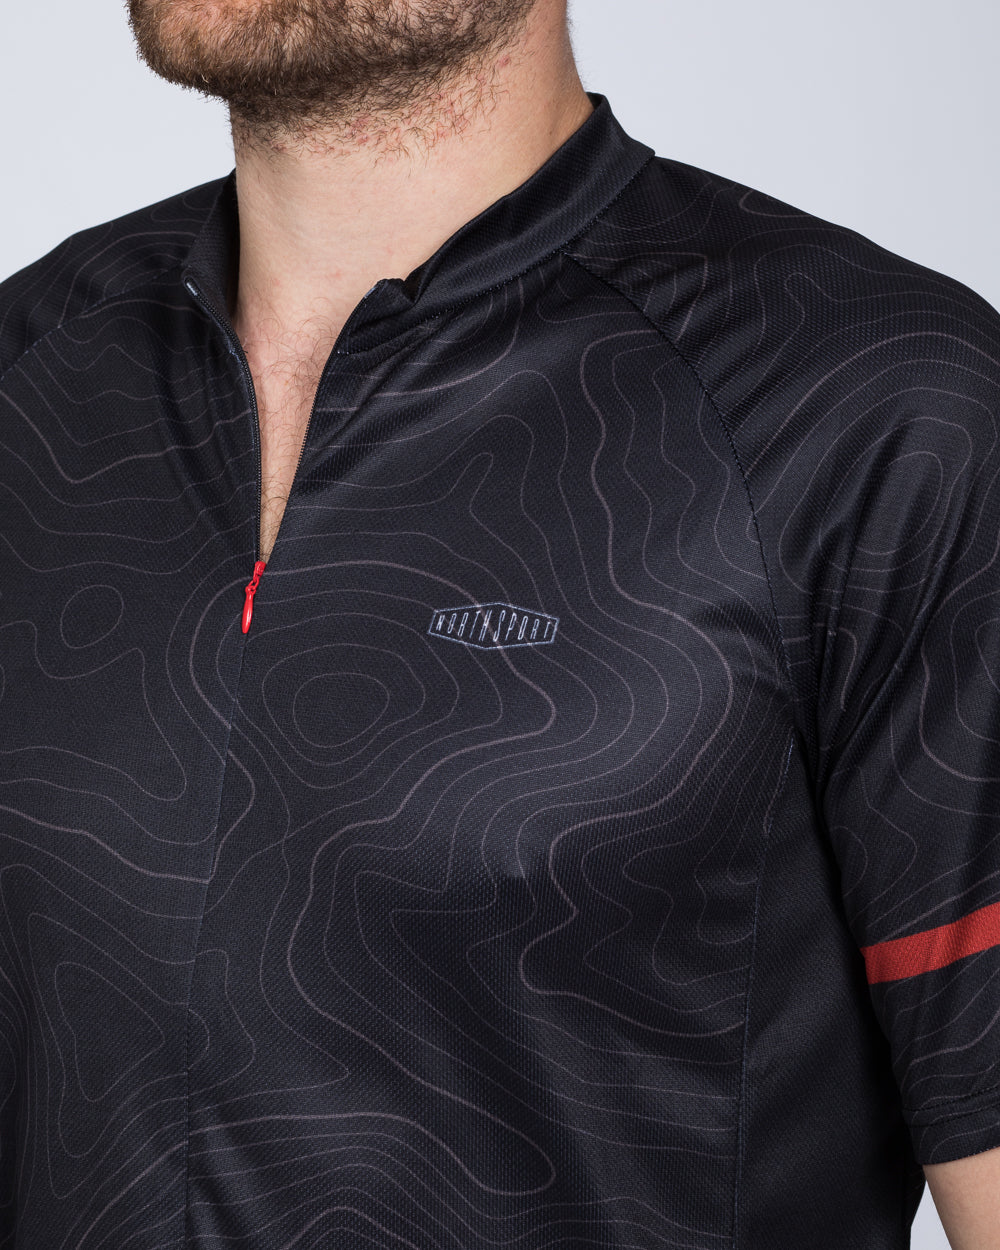 North 56 Tall Cycling Top (black/red)